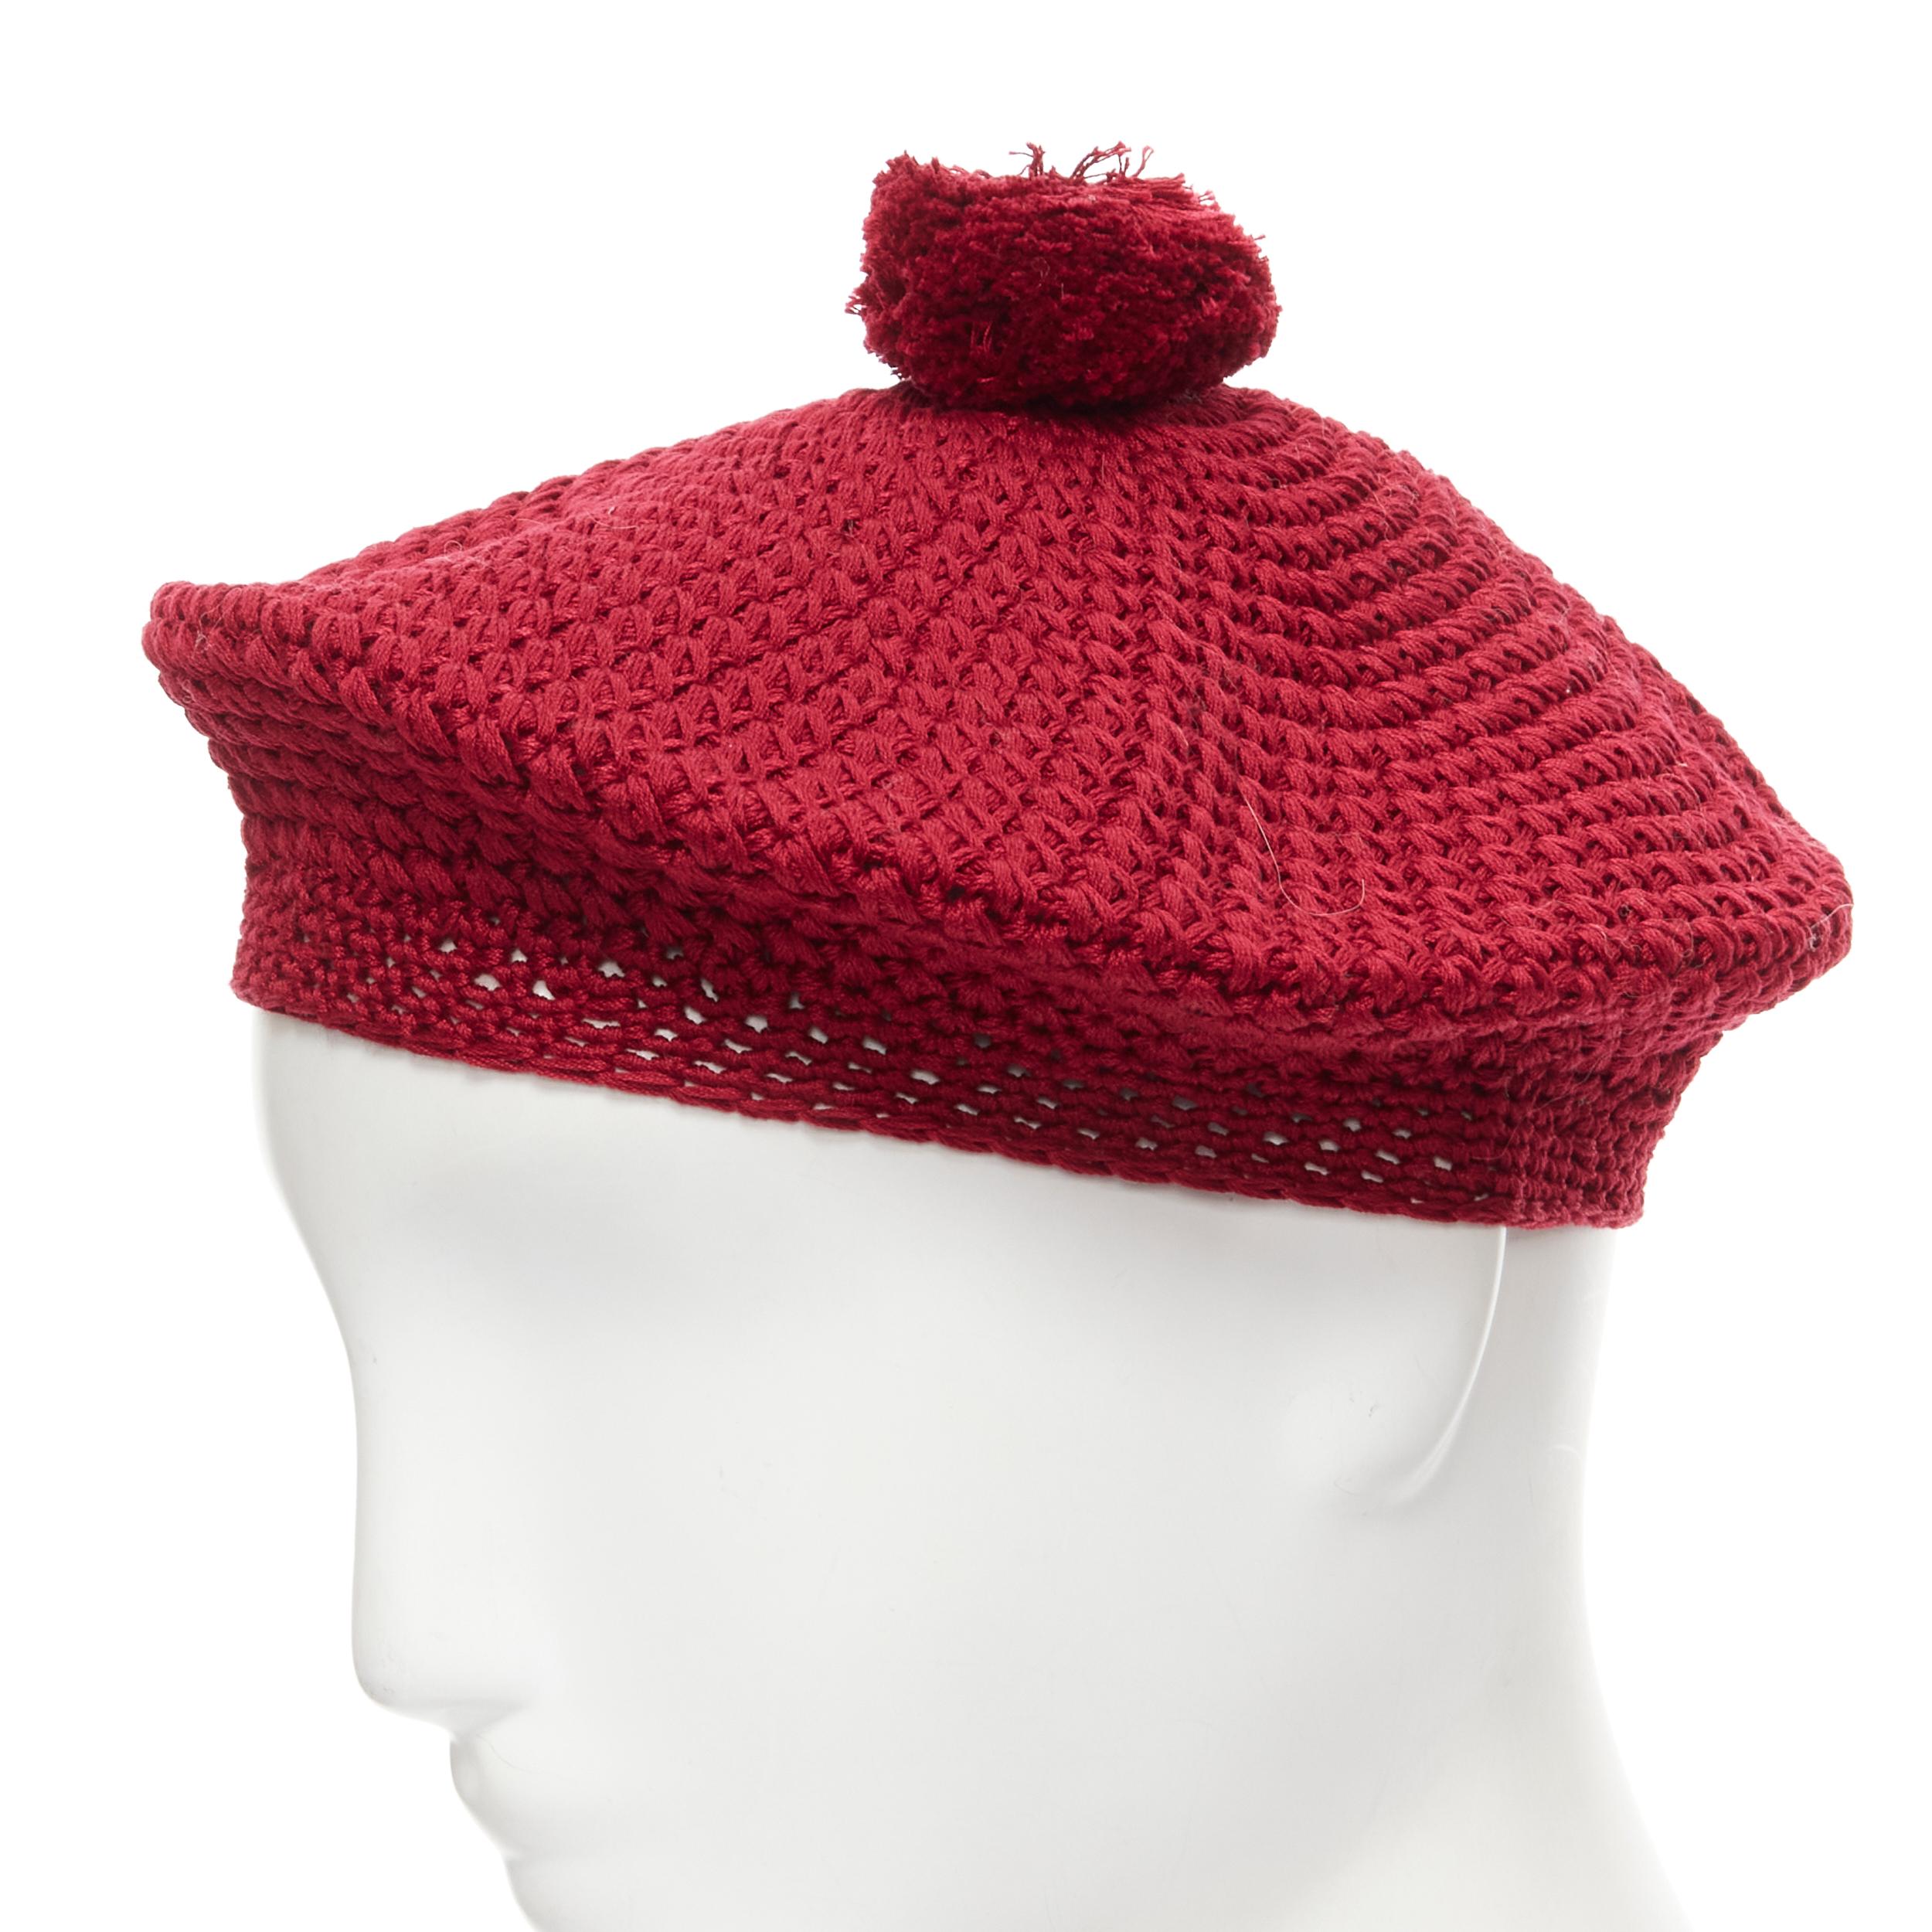 new GUCCI Michele 100% cotton burgundy red pom pom knit beret hat M 57cm 
Reference: MELK/A00161 
Brand: Gucci 
Designer: Alessandro Michele 
Material: Cotton 
Color: Red 
Pattern: Solid 
Made in: Italy 

CONDITION: 
Condition: New with tags. 
Comes